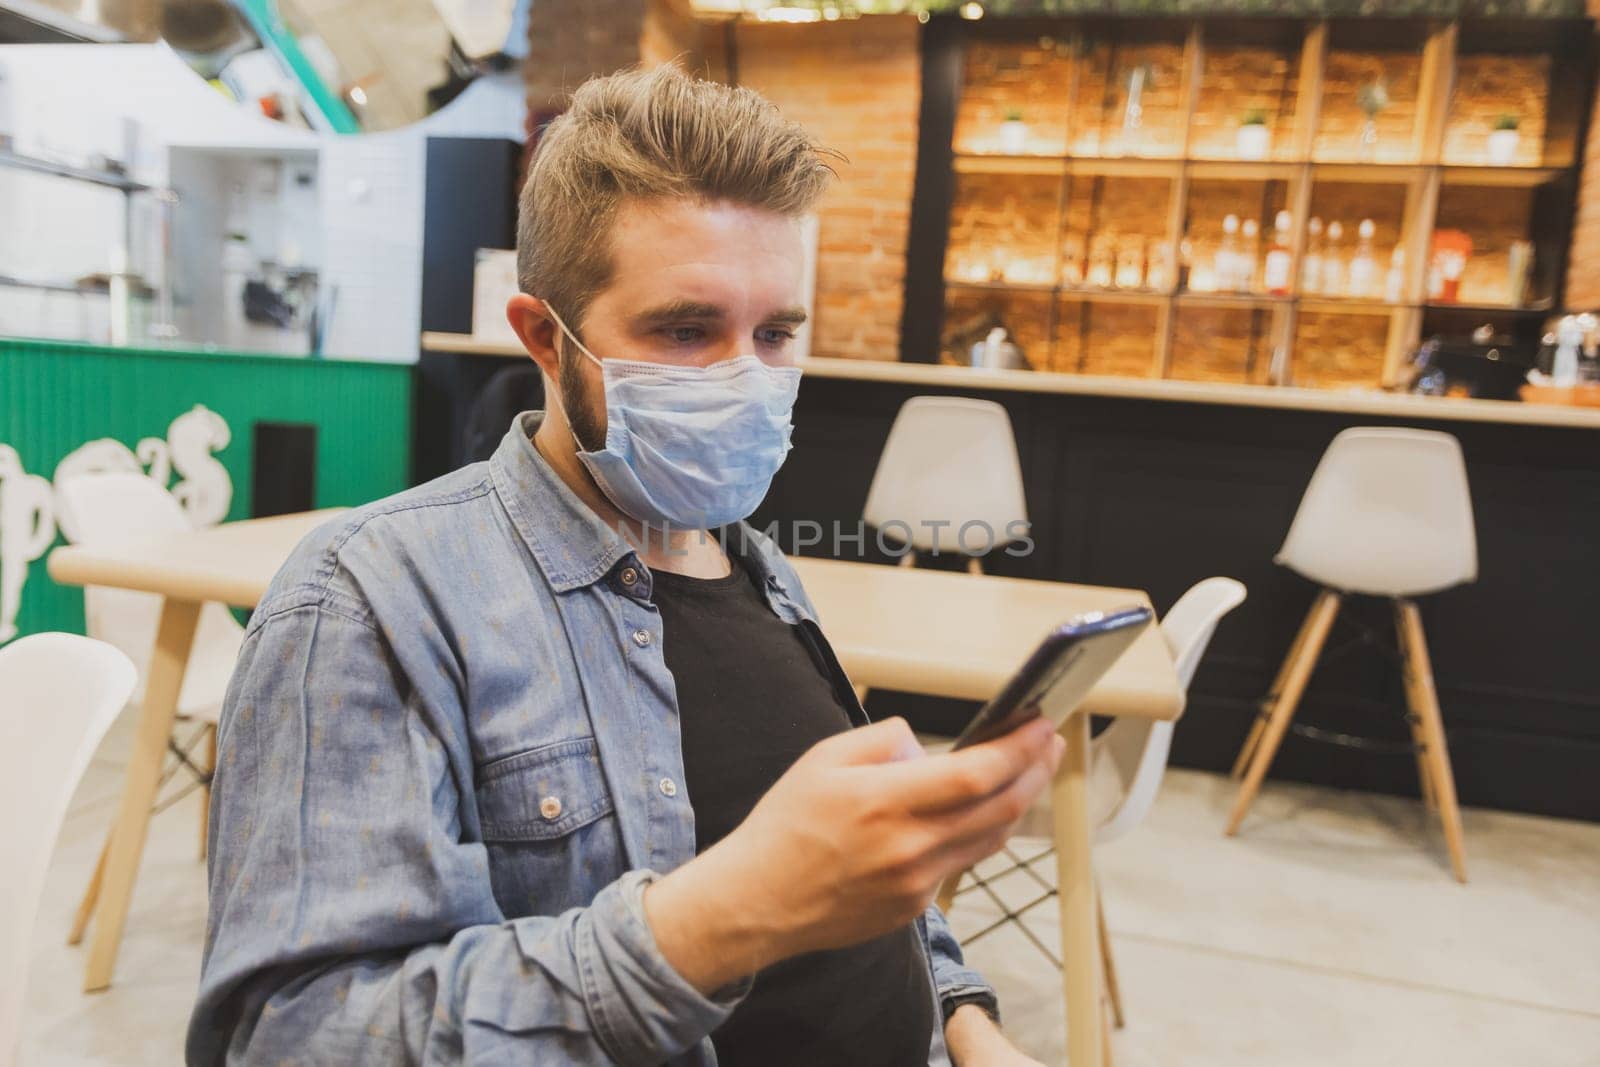 Man wears medical face mask in public area and using smartphone to do work business and social network communication in public cafe work space area. by Satura86